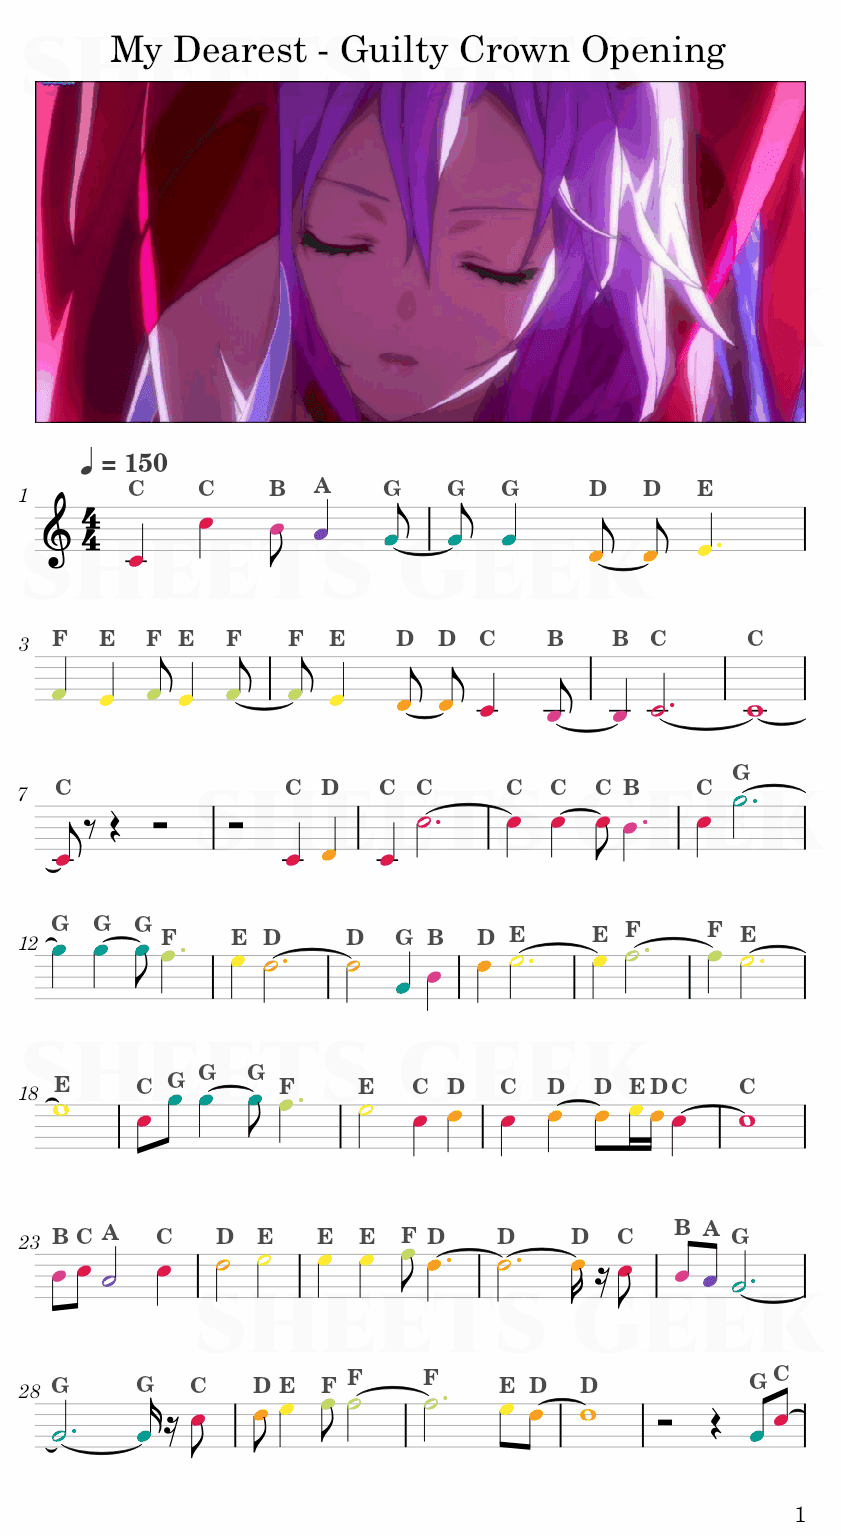 My Dearest - Guilty Crown Opening Easy Sheet Music Free for piano, keyboard, flute, violin, sax, cello page 1